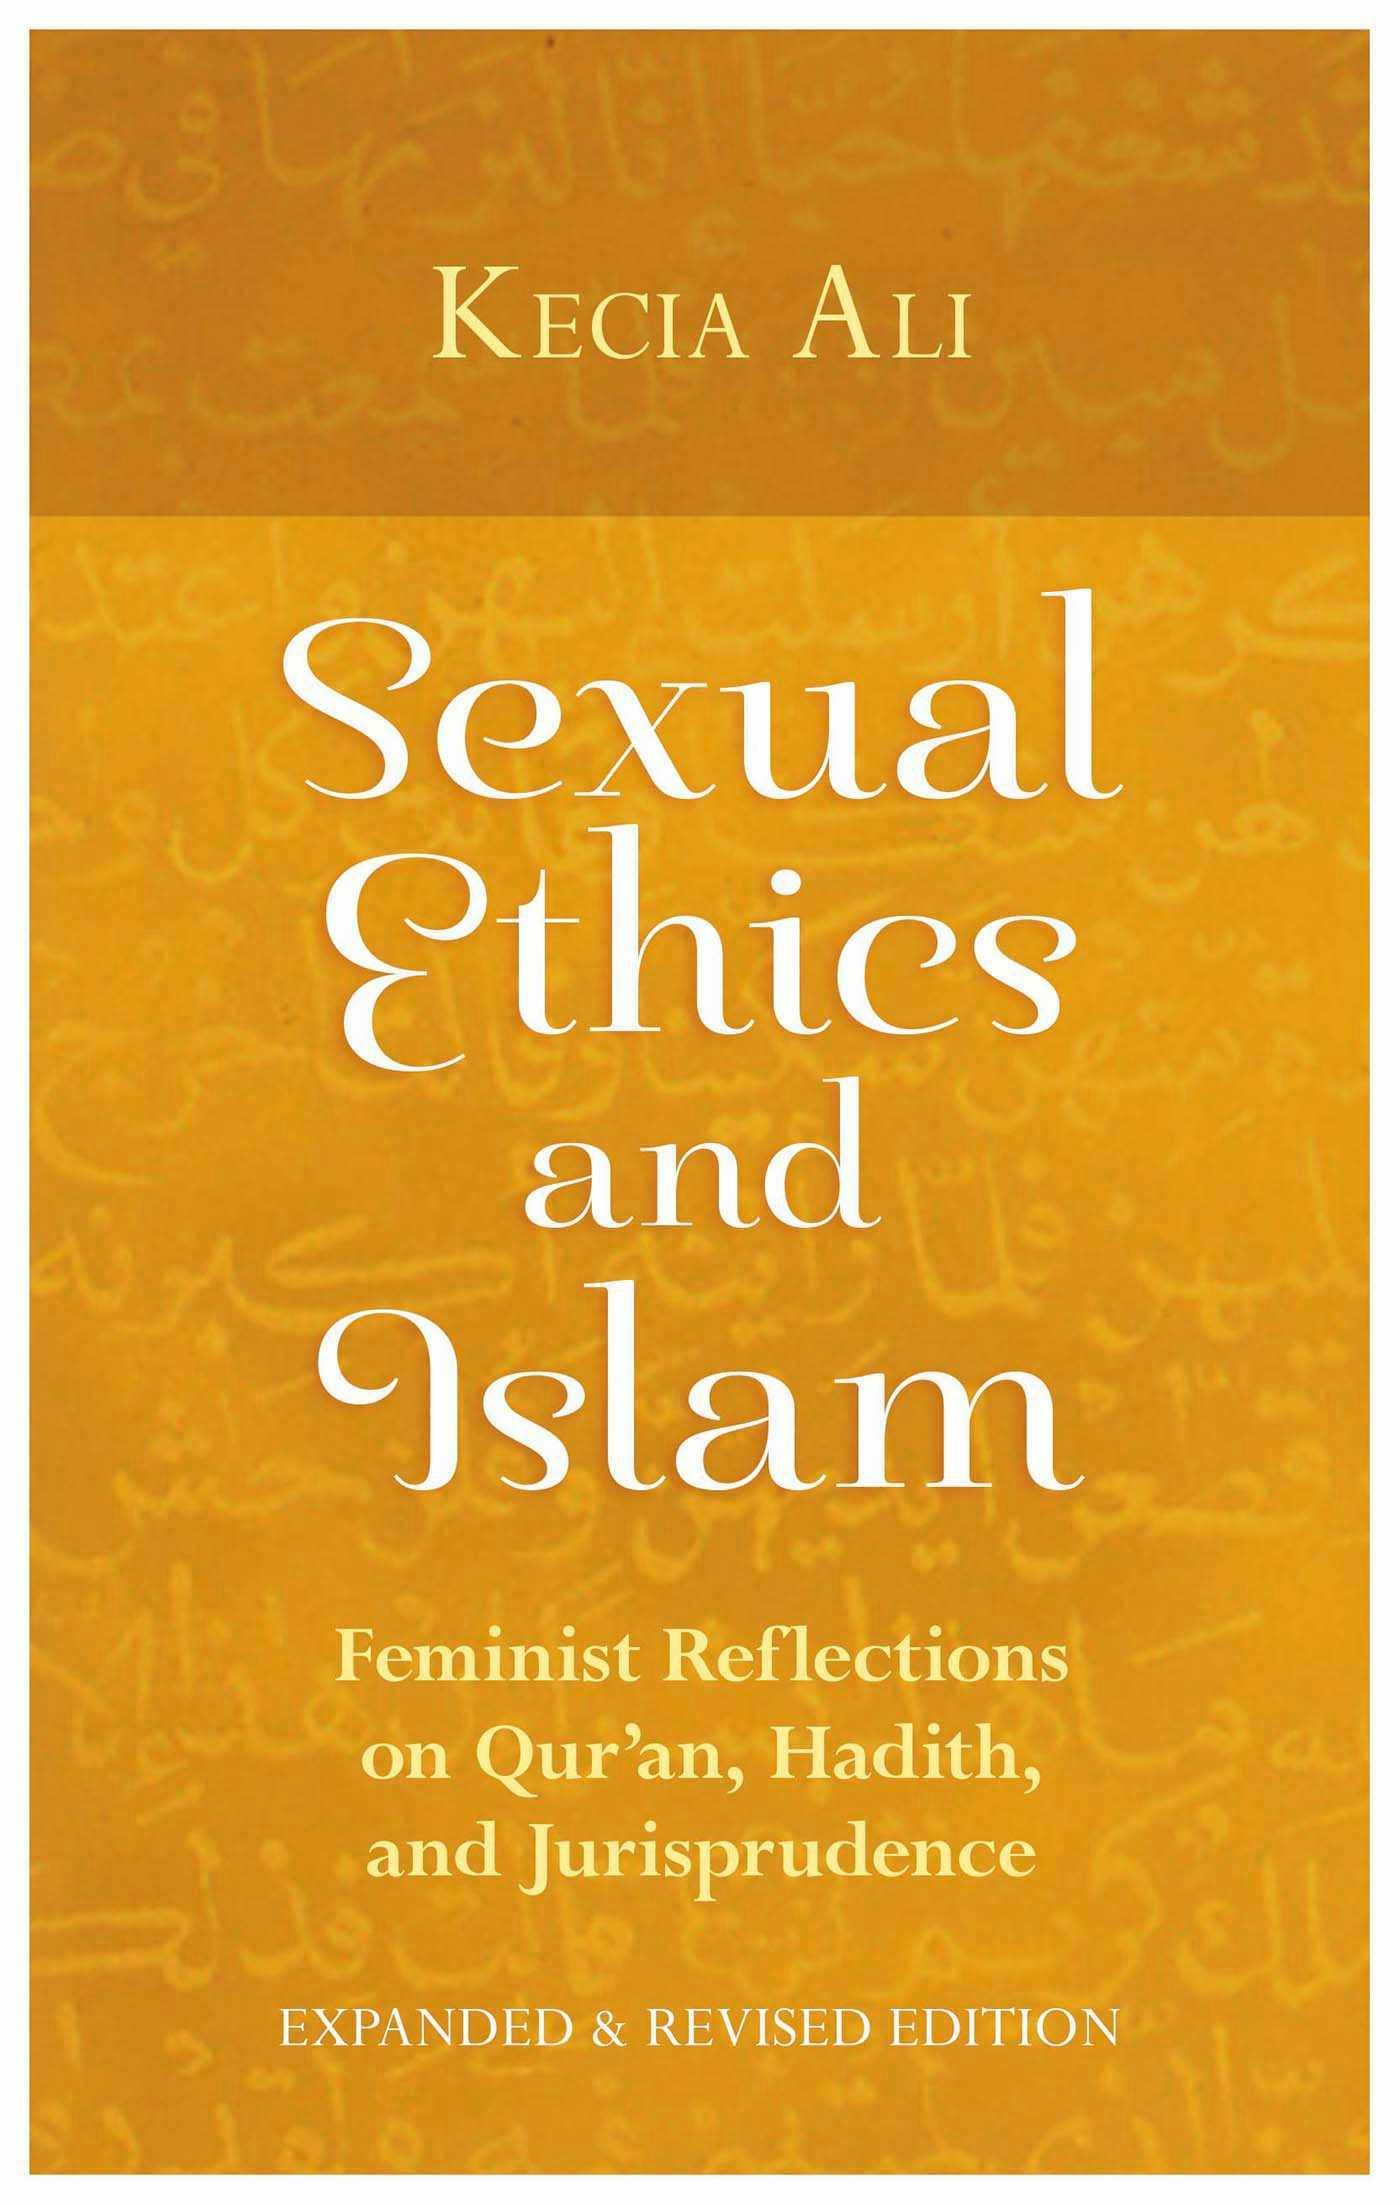 Sexual Ethics and Islam: Feminist Reflections on Qur'an, Hadith, and Jurisprudence - Kecia Ali